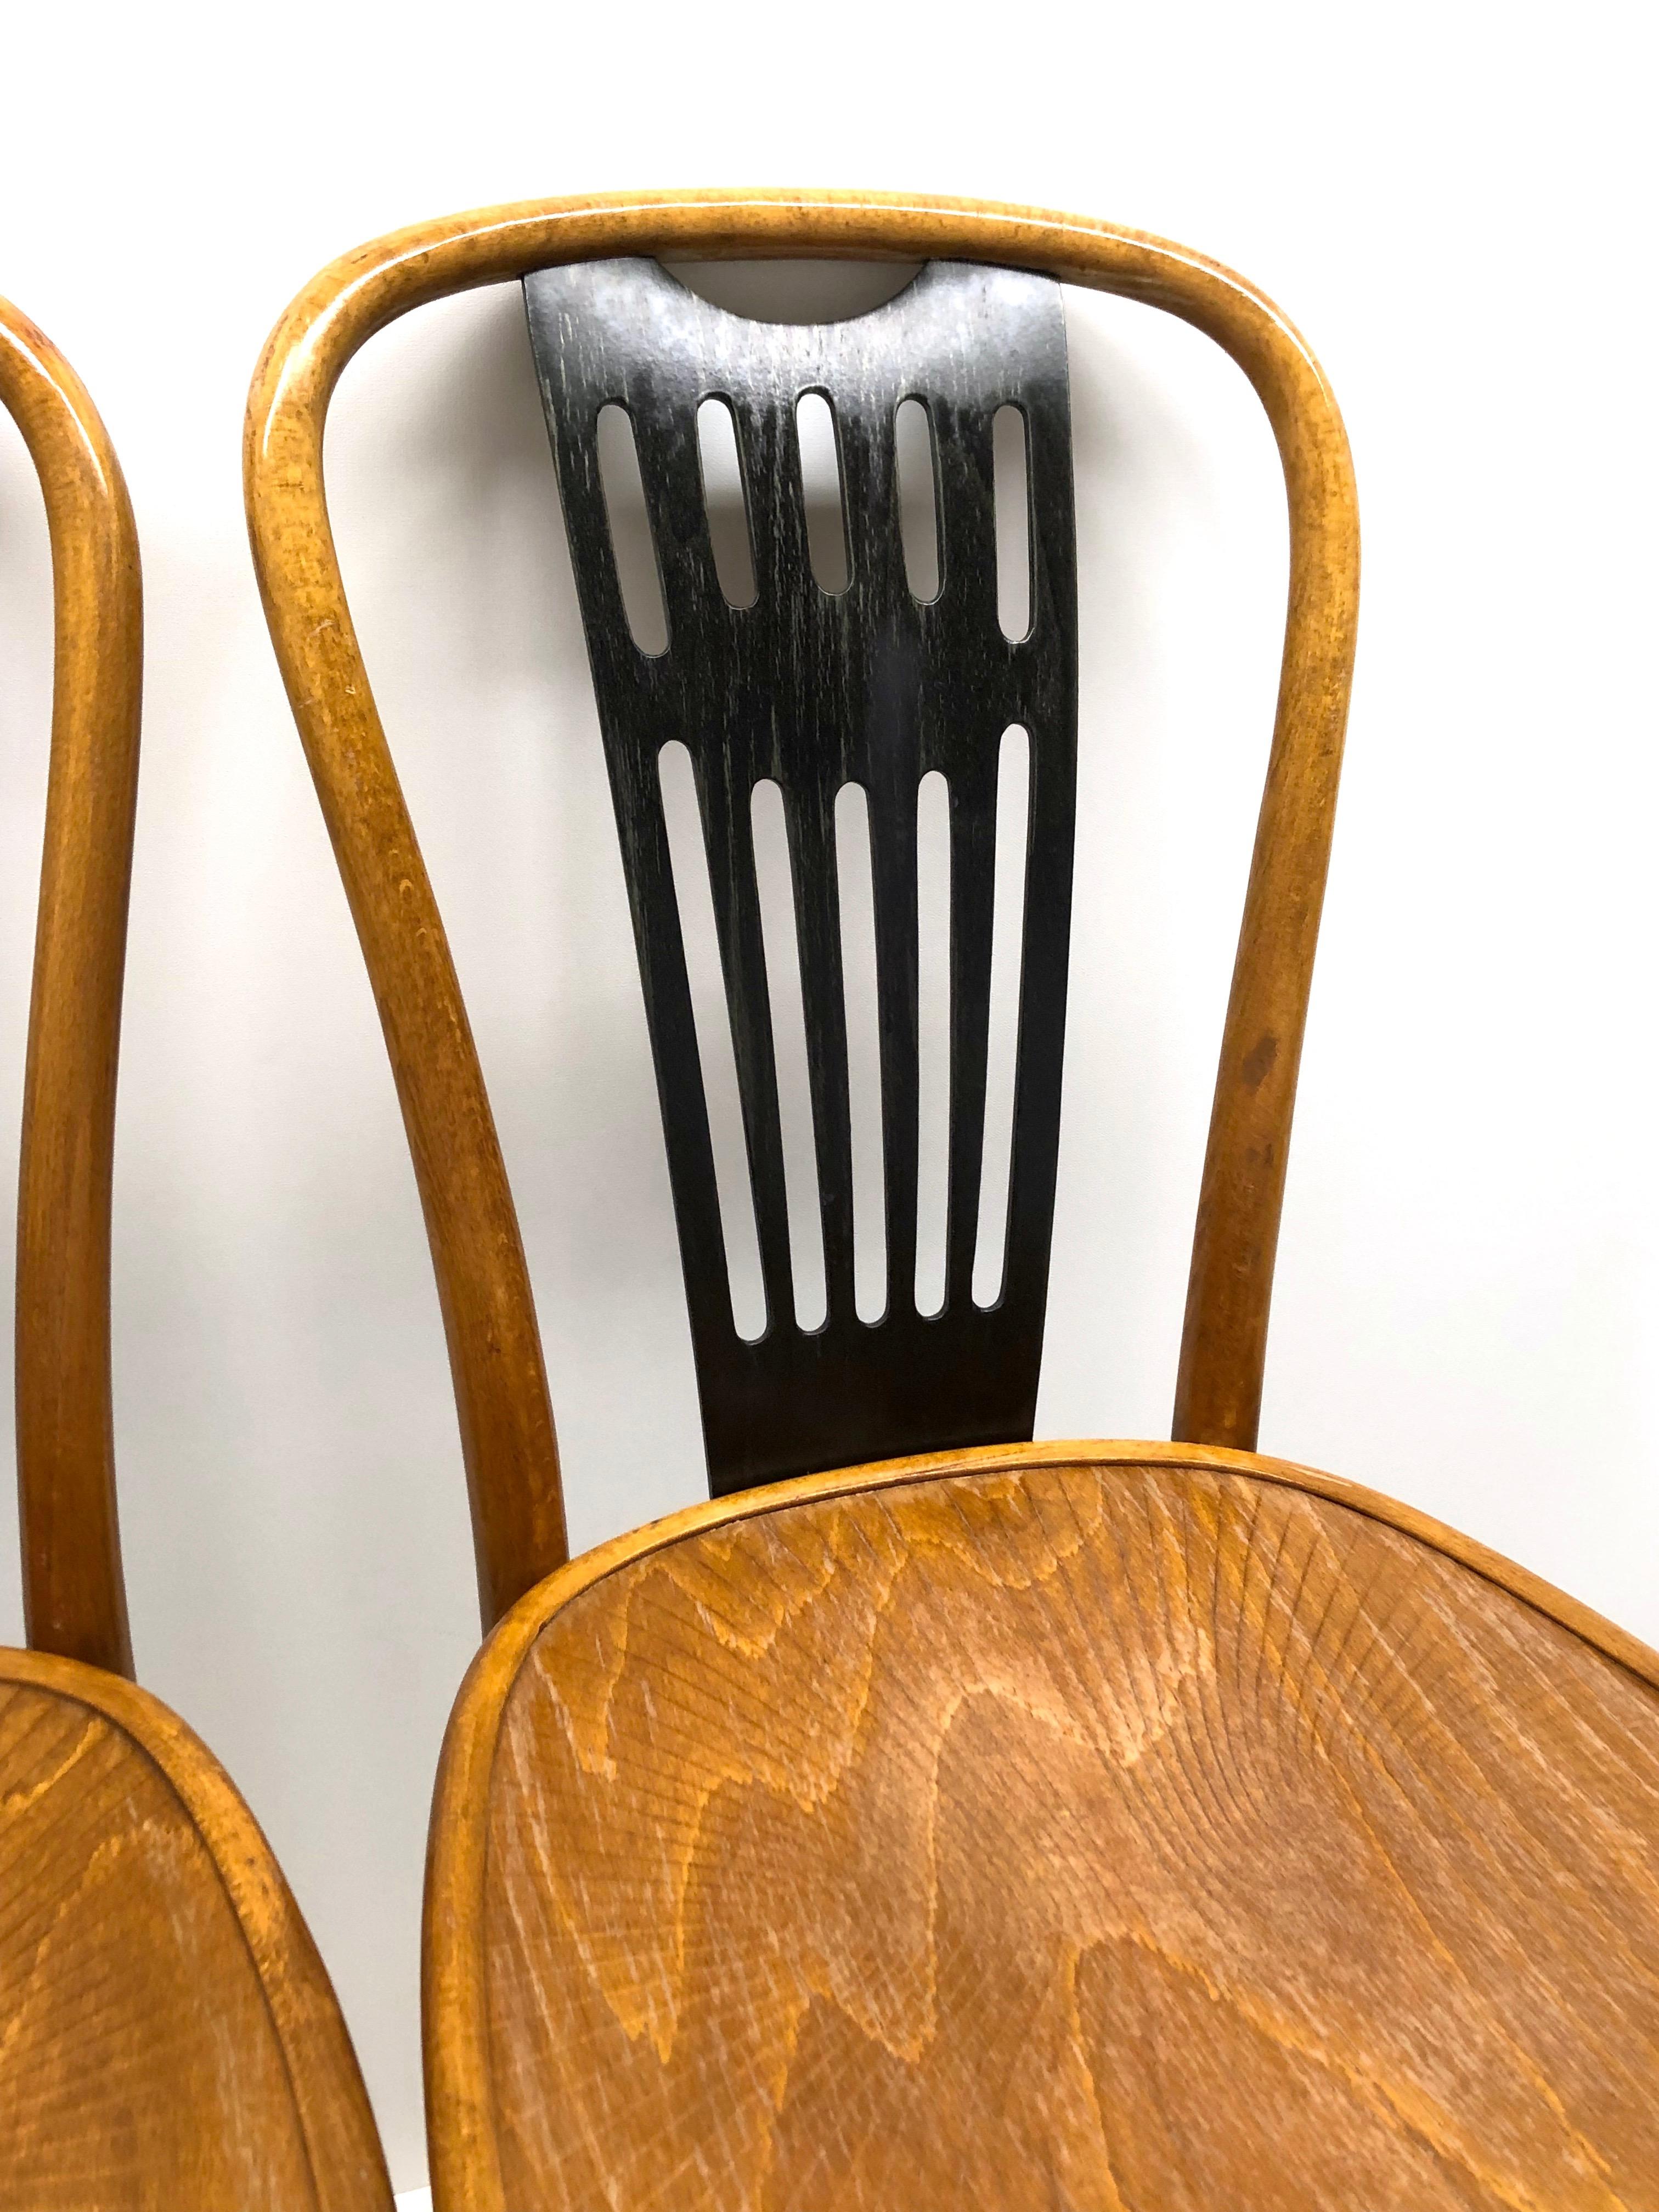 Bauhaus Pair of Bentwood Chairs made by ZPM Radomsko, Poland for Mobilair, Germany